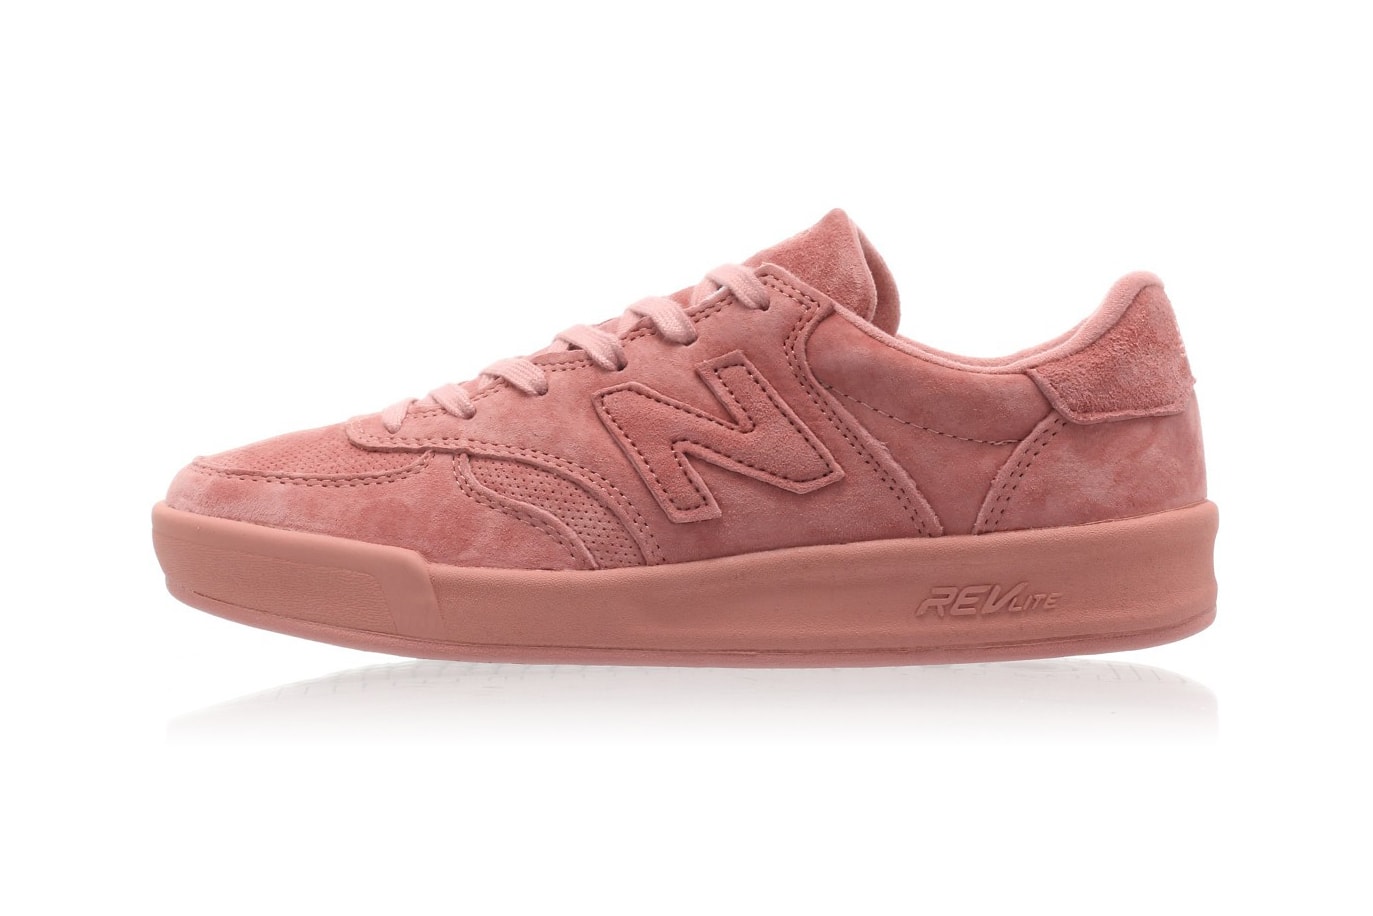 New Balance 300 Sneaker Dusted Peach Pink Rose Women